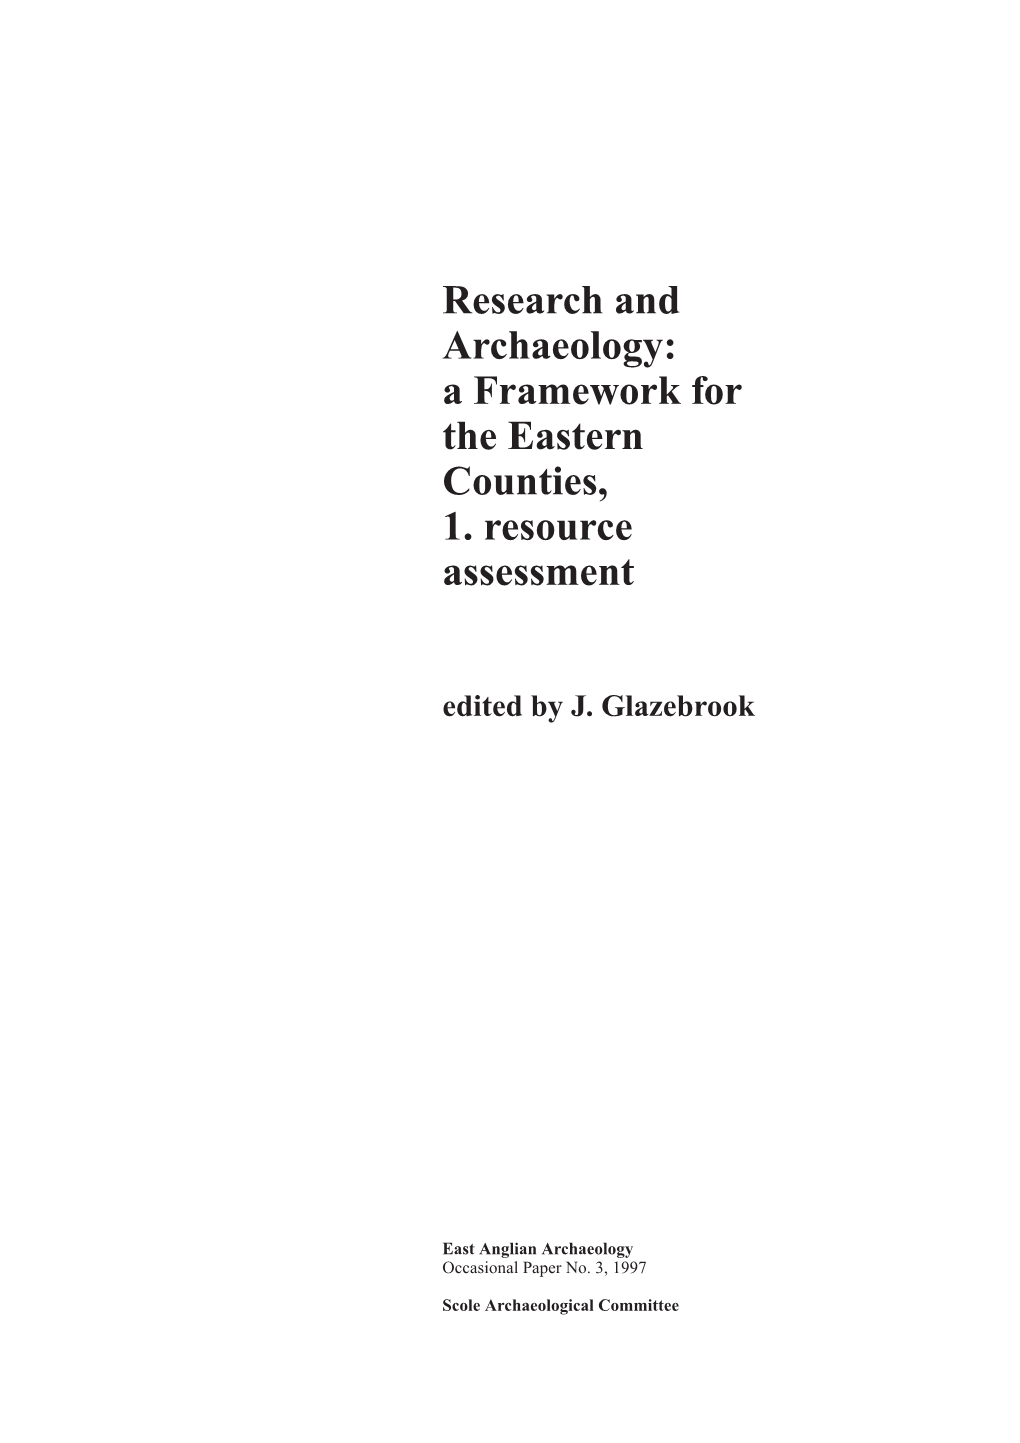 Research and Archaeology: a Framework for the Eastern Counties, 1